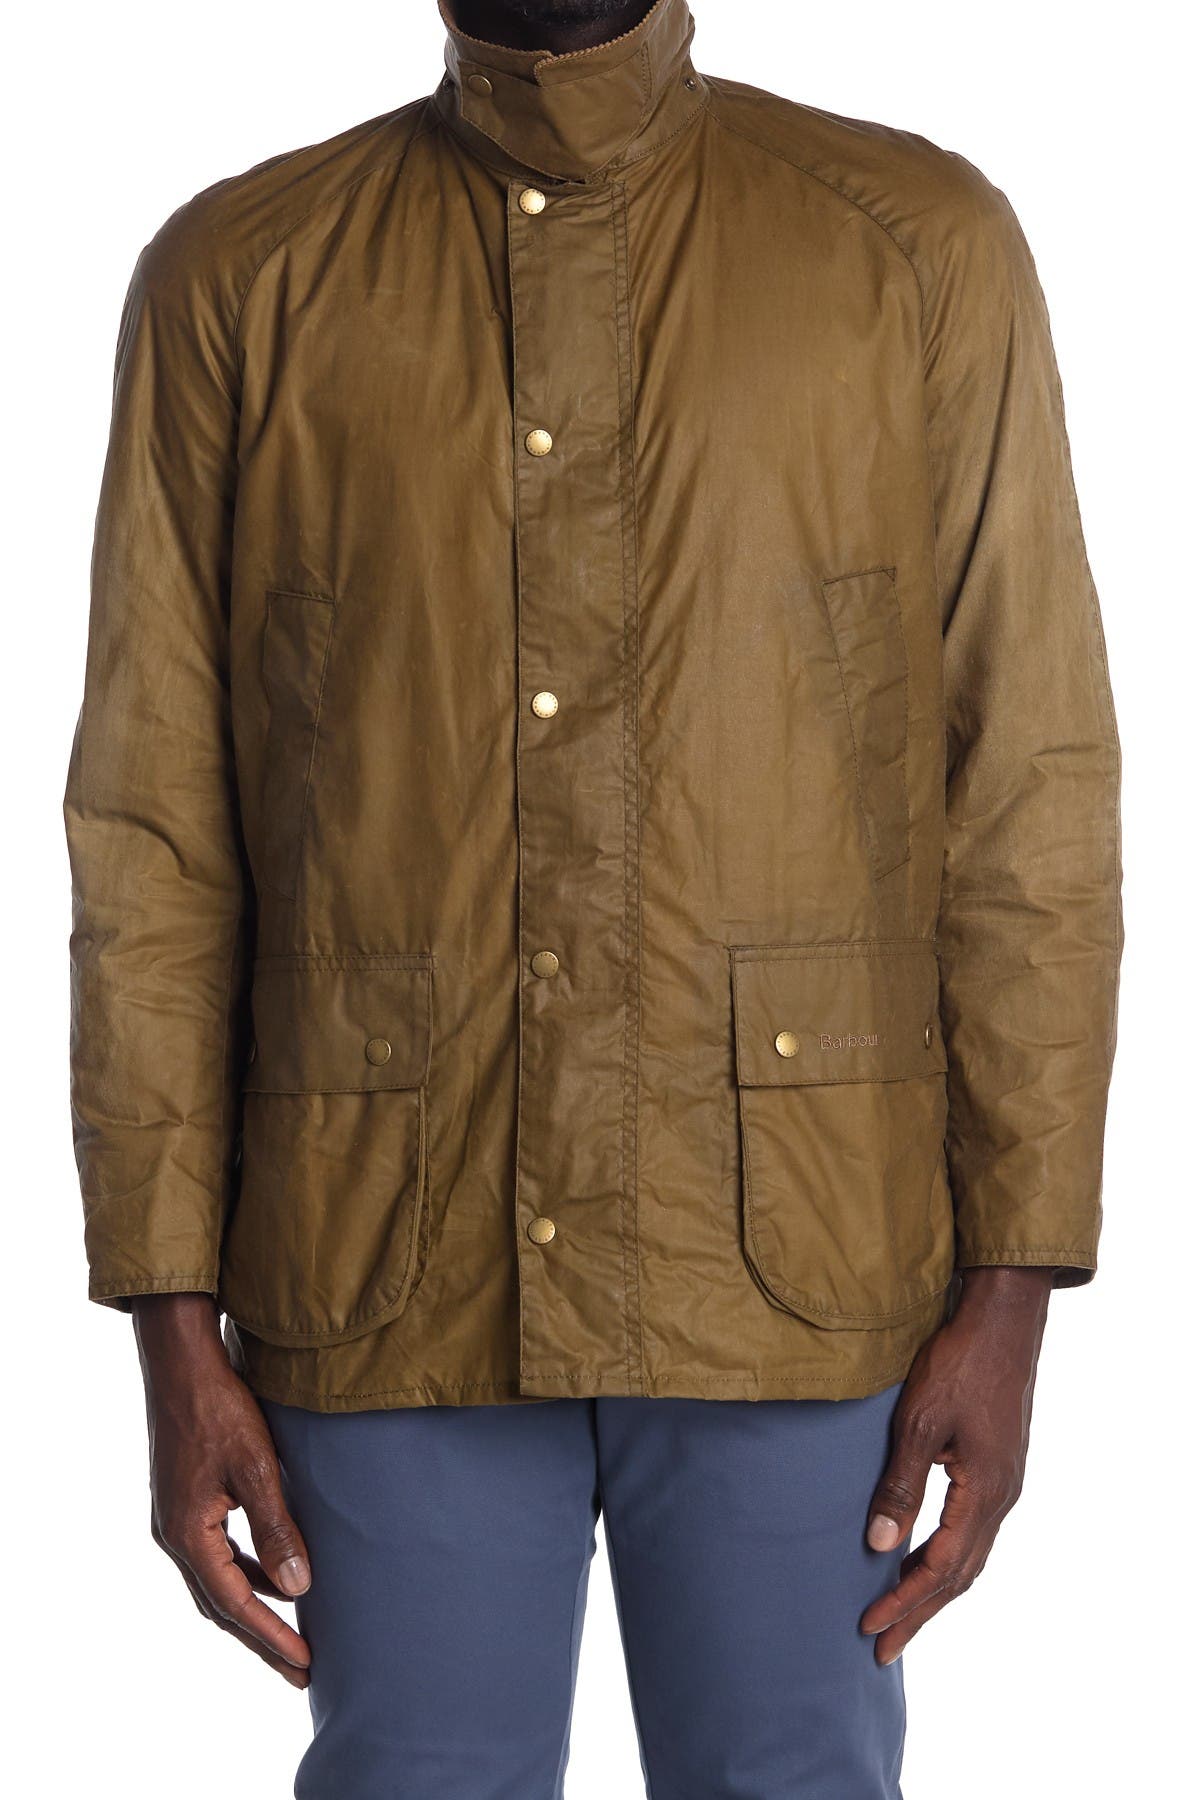 barbour lightweight ashby review